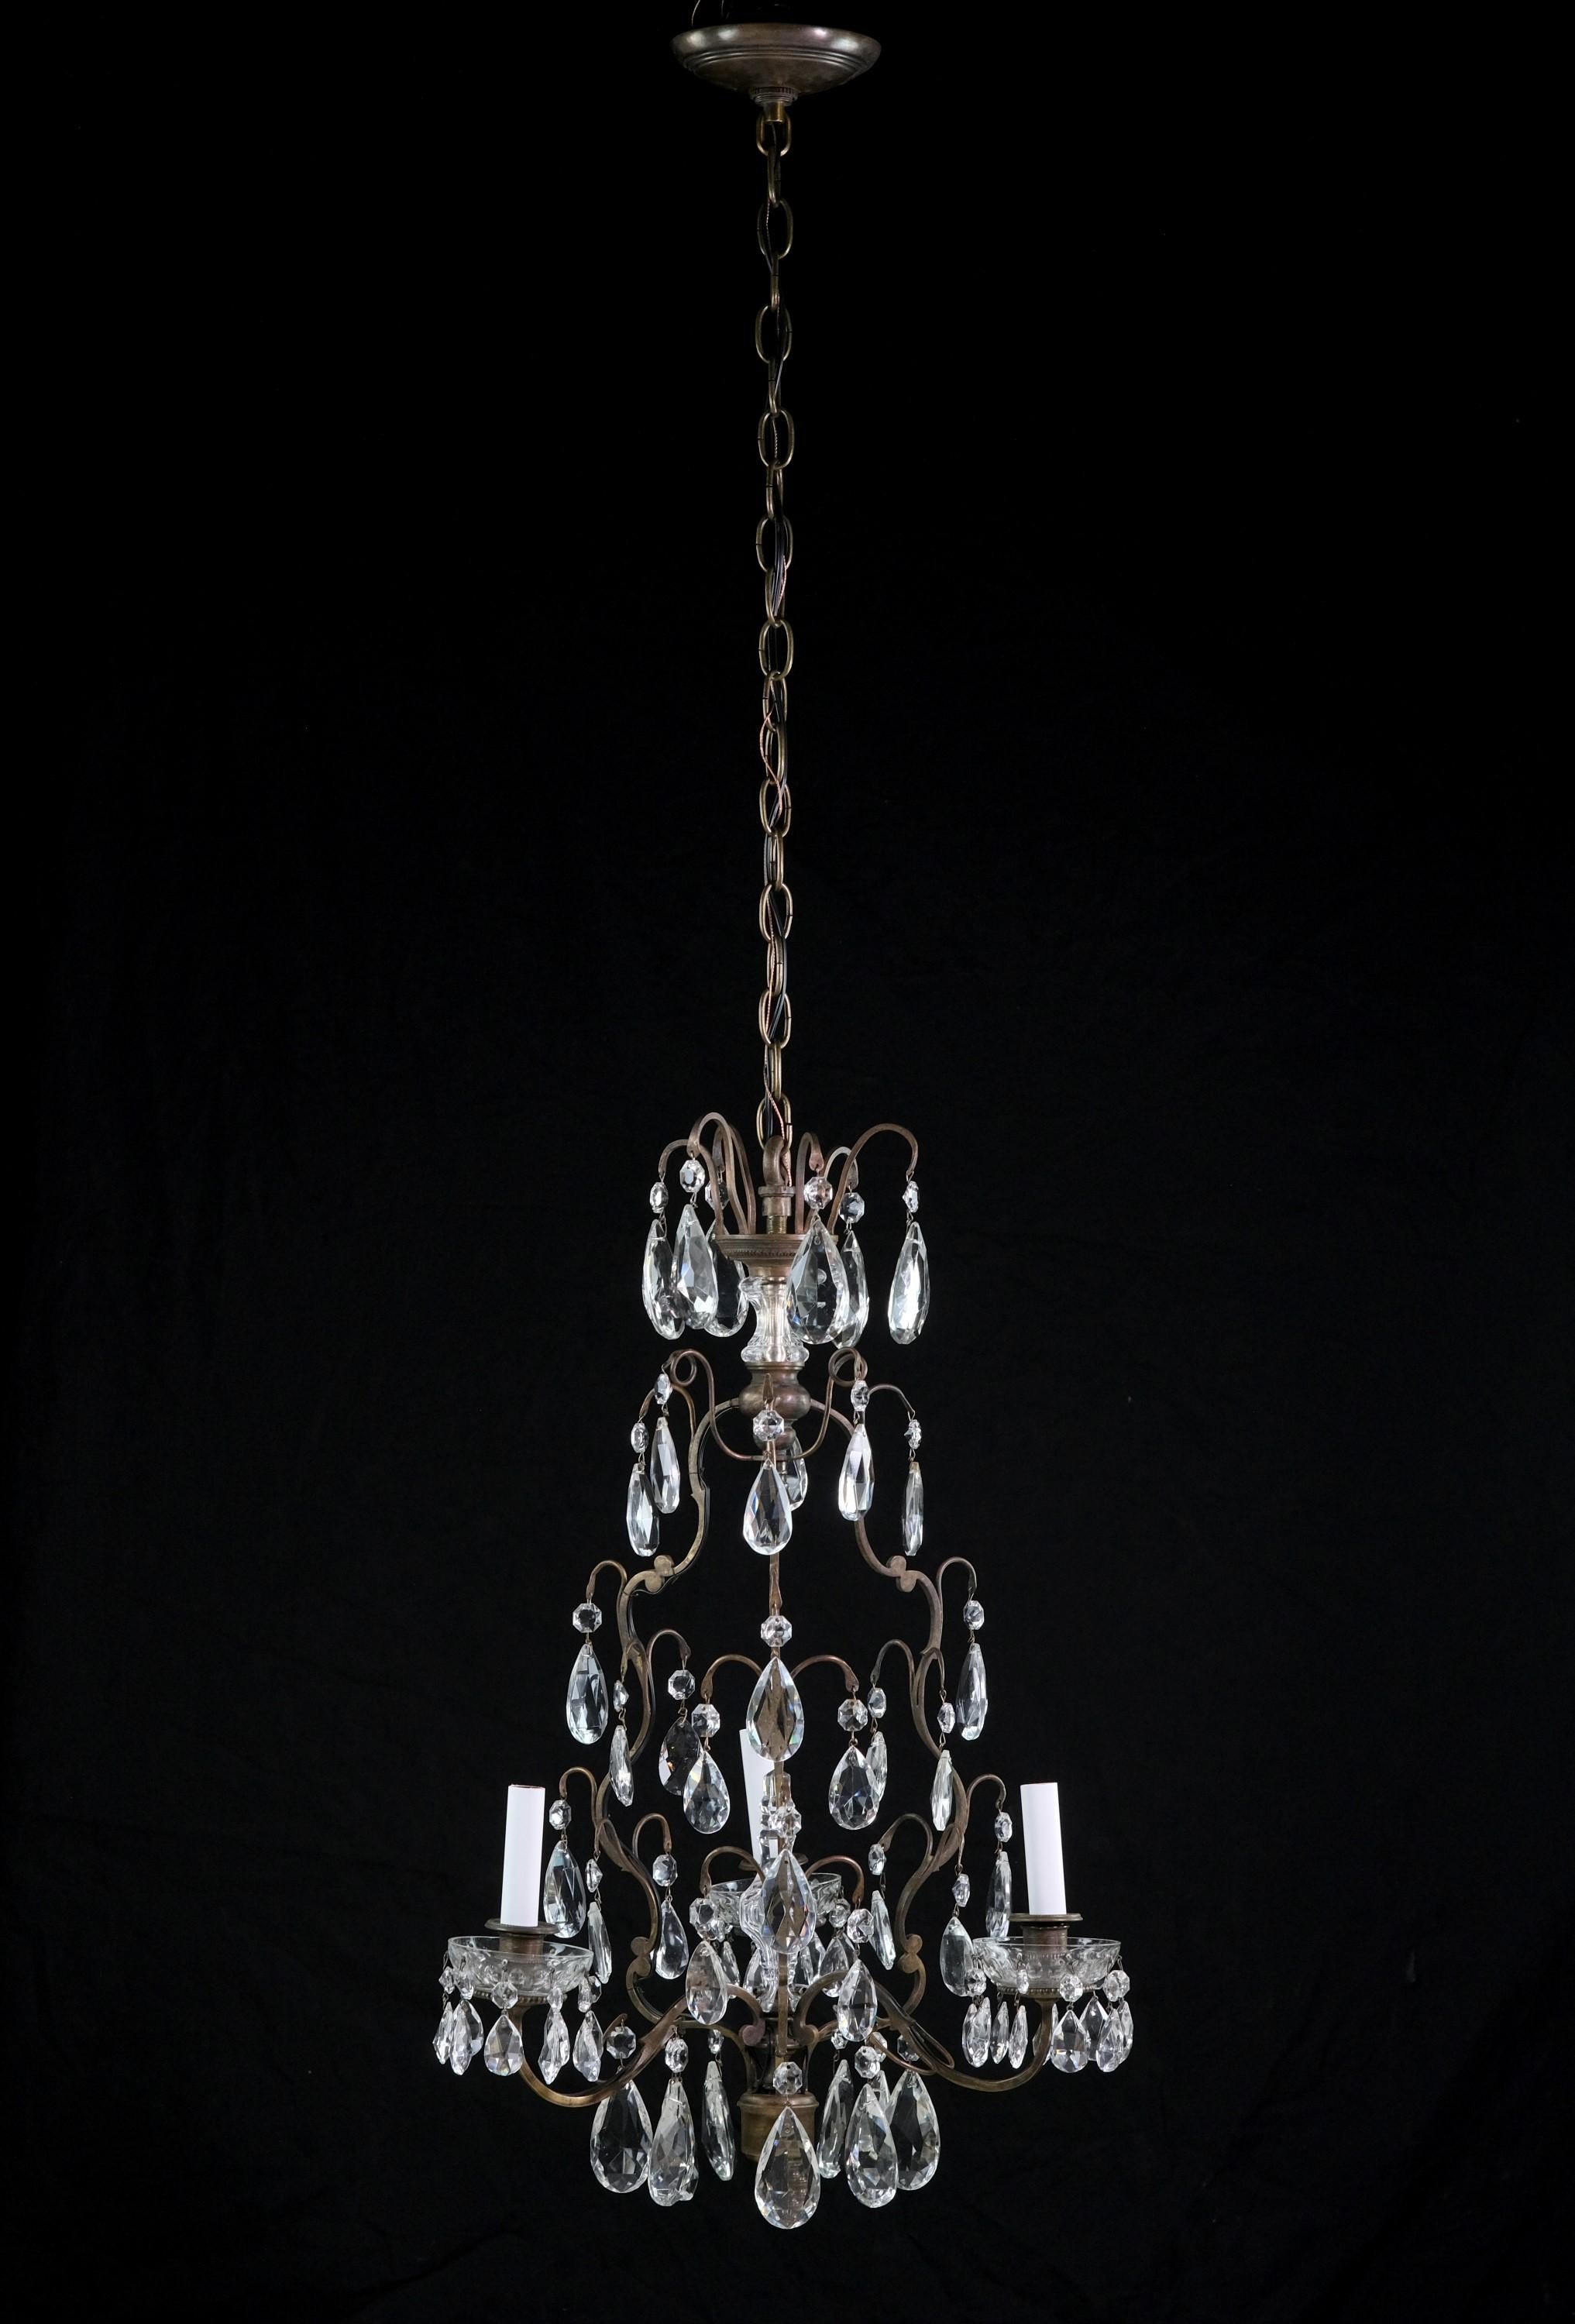 This elegant early 20th century French chandelier has an elaborate bronze frame with three arms each holding a candlestick light which is adorned with a crystal bobeche and tear drop crystals. This multi-tier crystal chandelier also features a